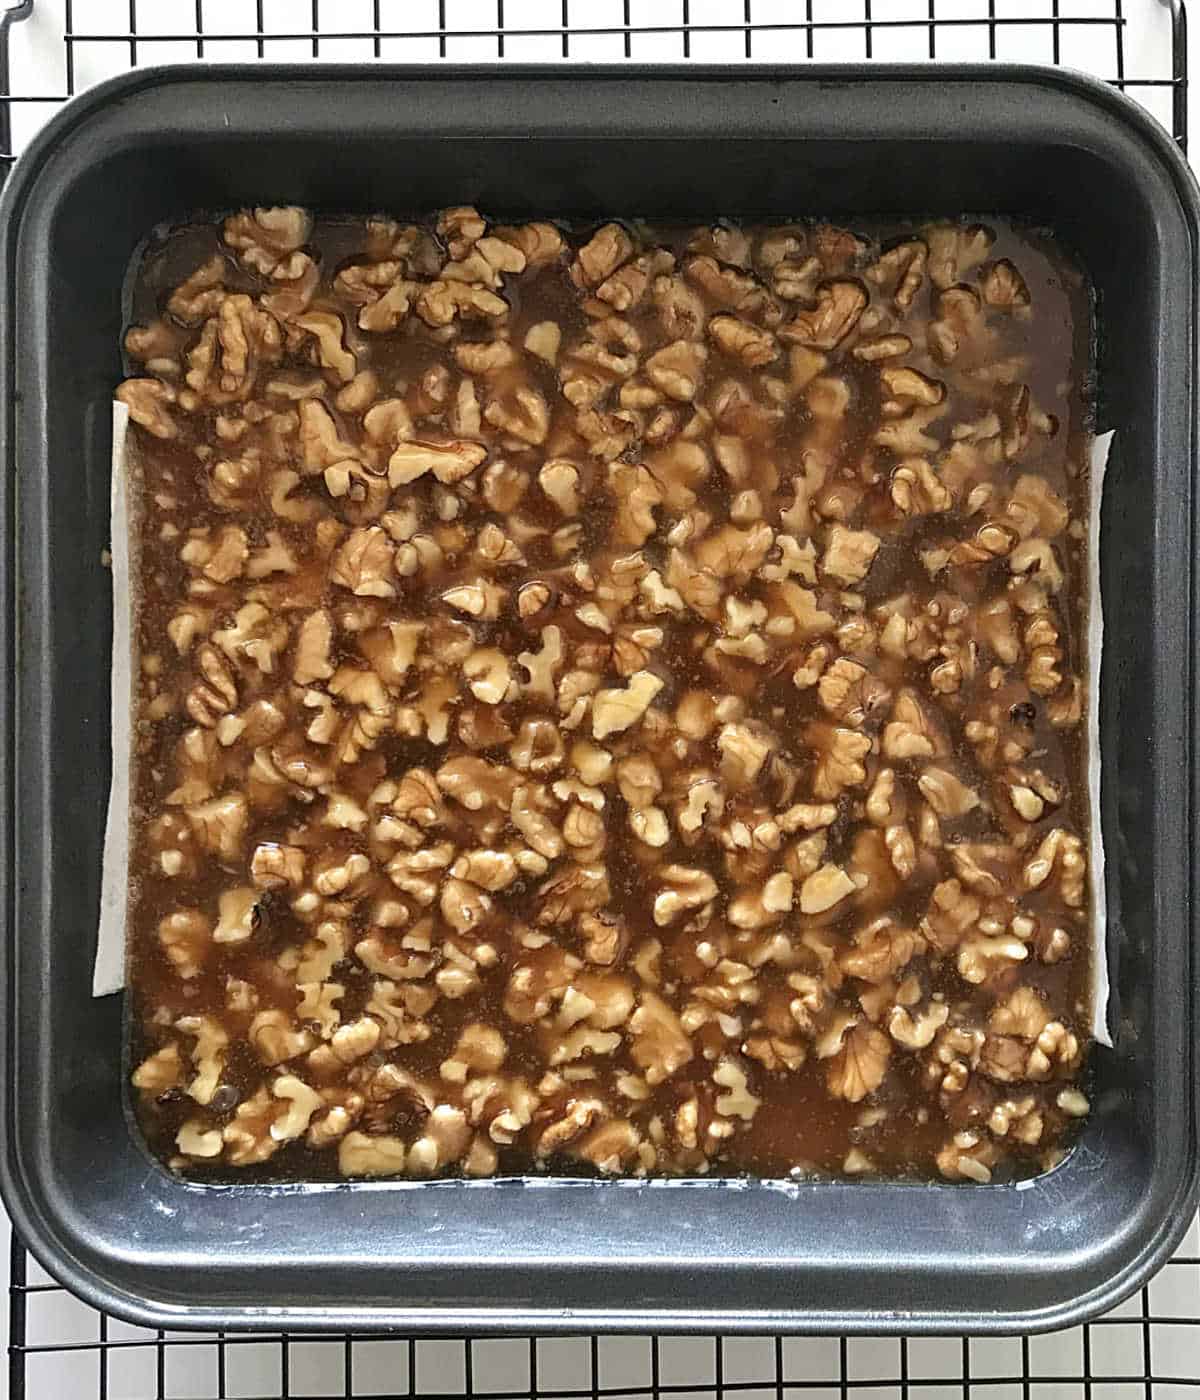 Black rack with square baking pan containing unbaked honey walnut squares.